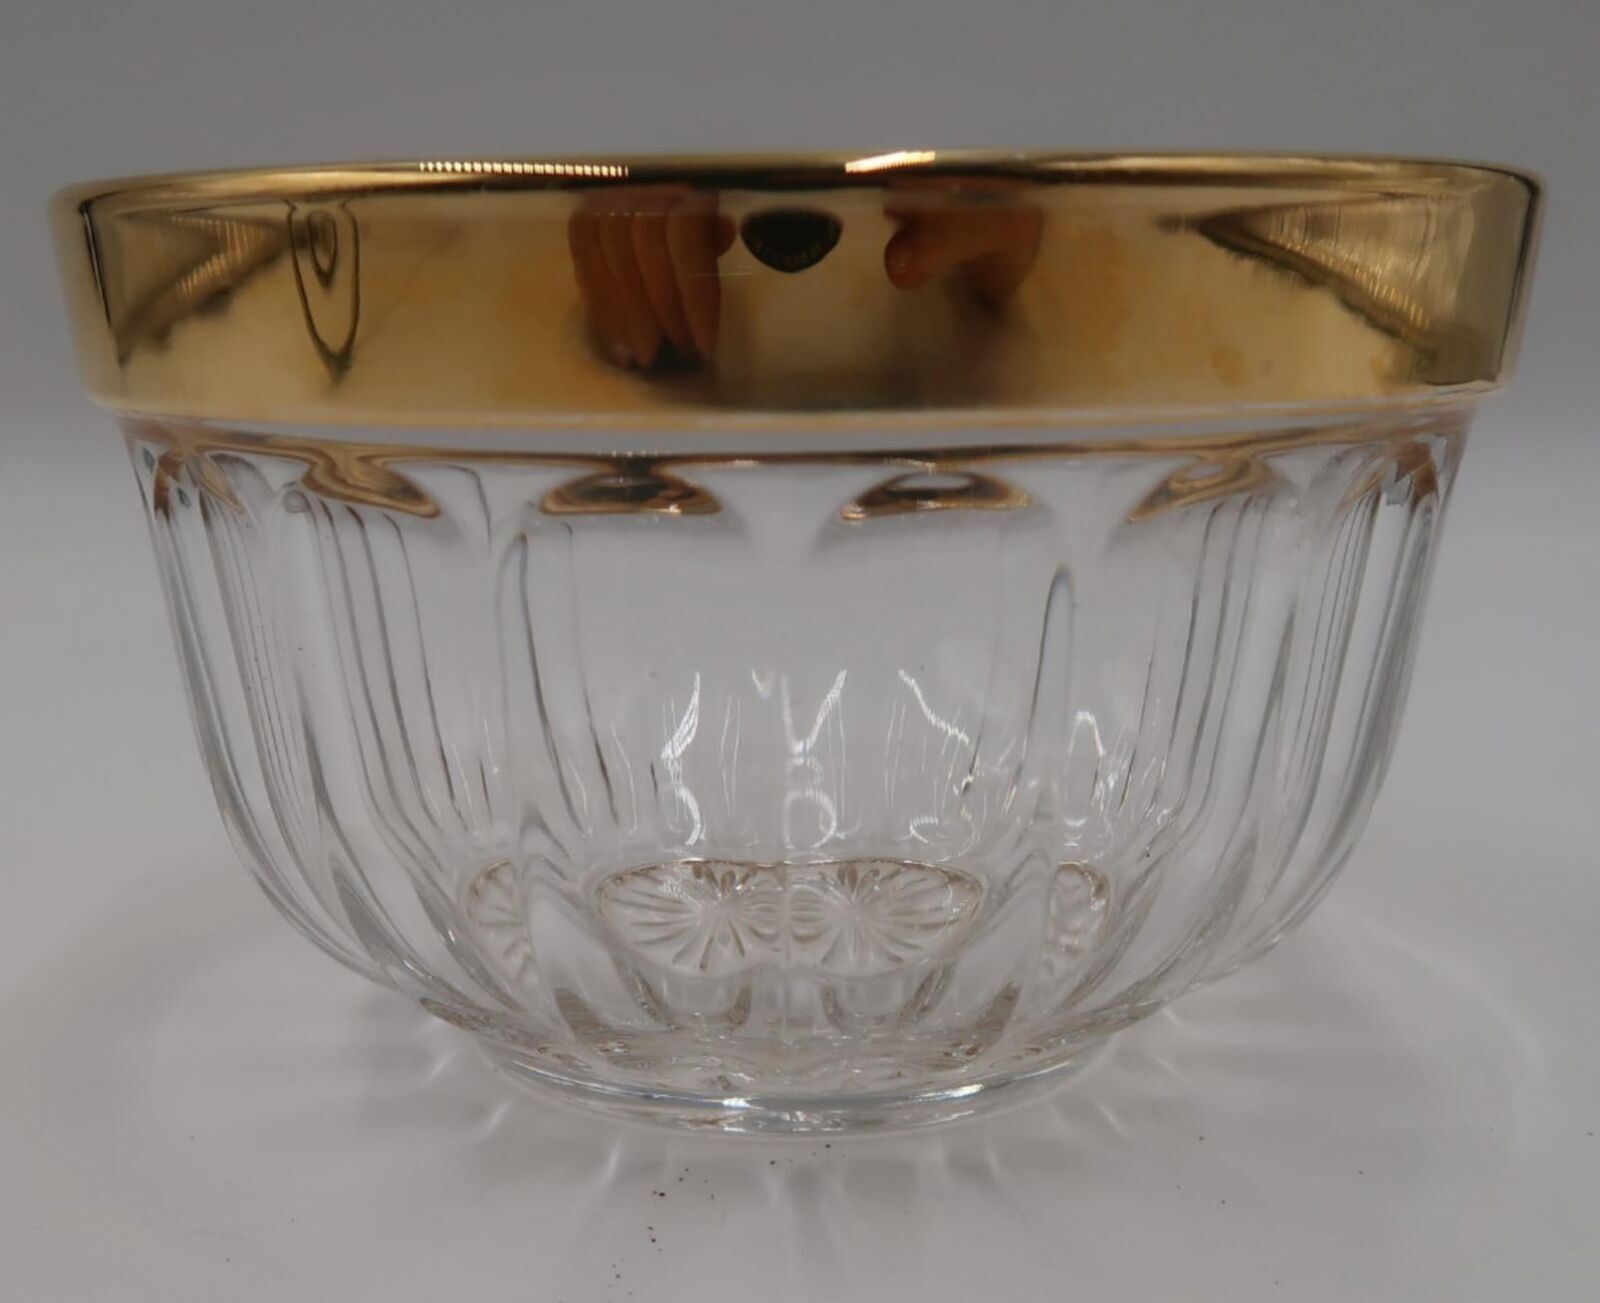 1920s WIDE GOLD RIMMED CLEAR PRESSED GLASS BERRY BOWL EXCELLENT CONDITION GL1-8